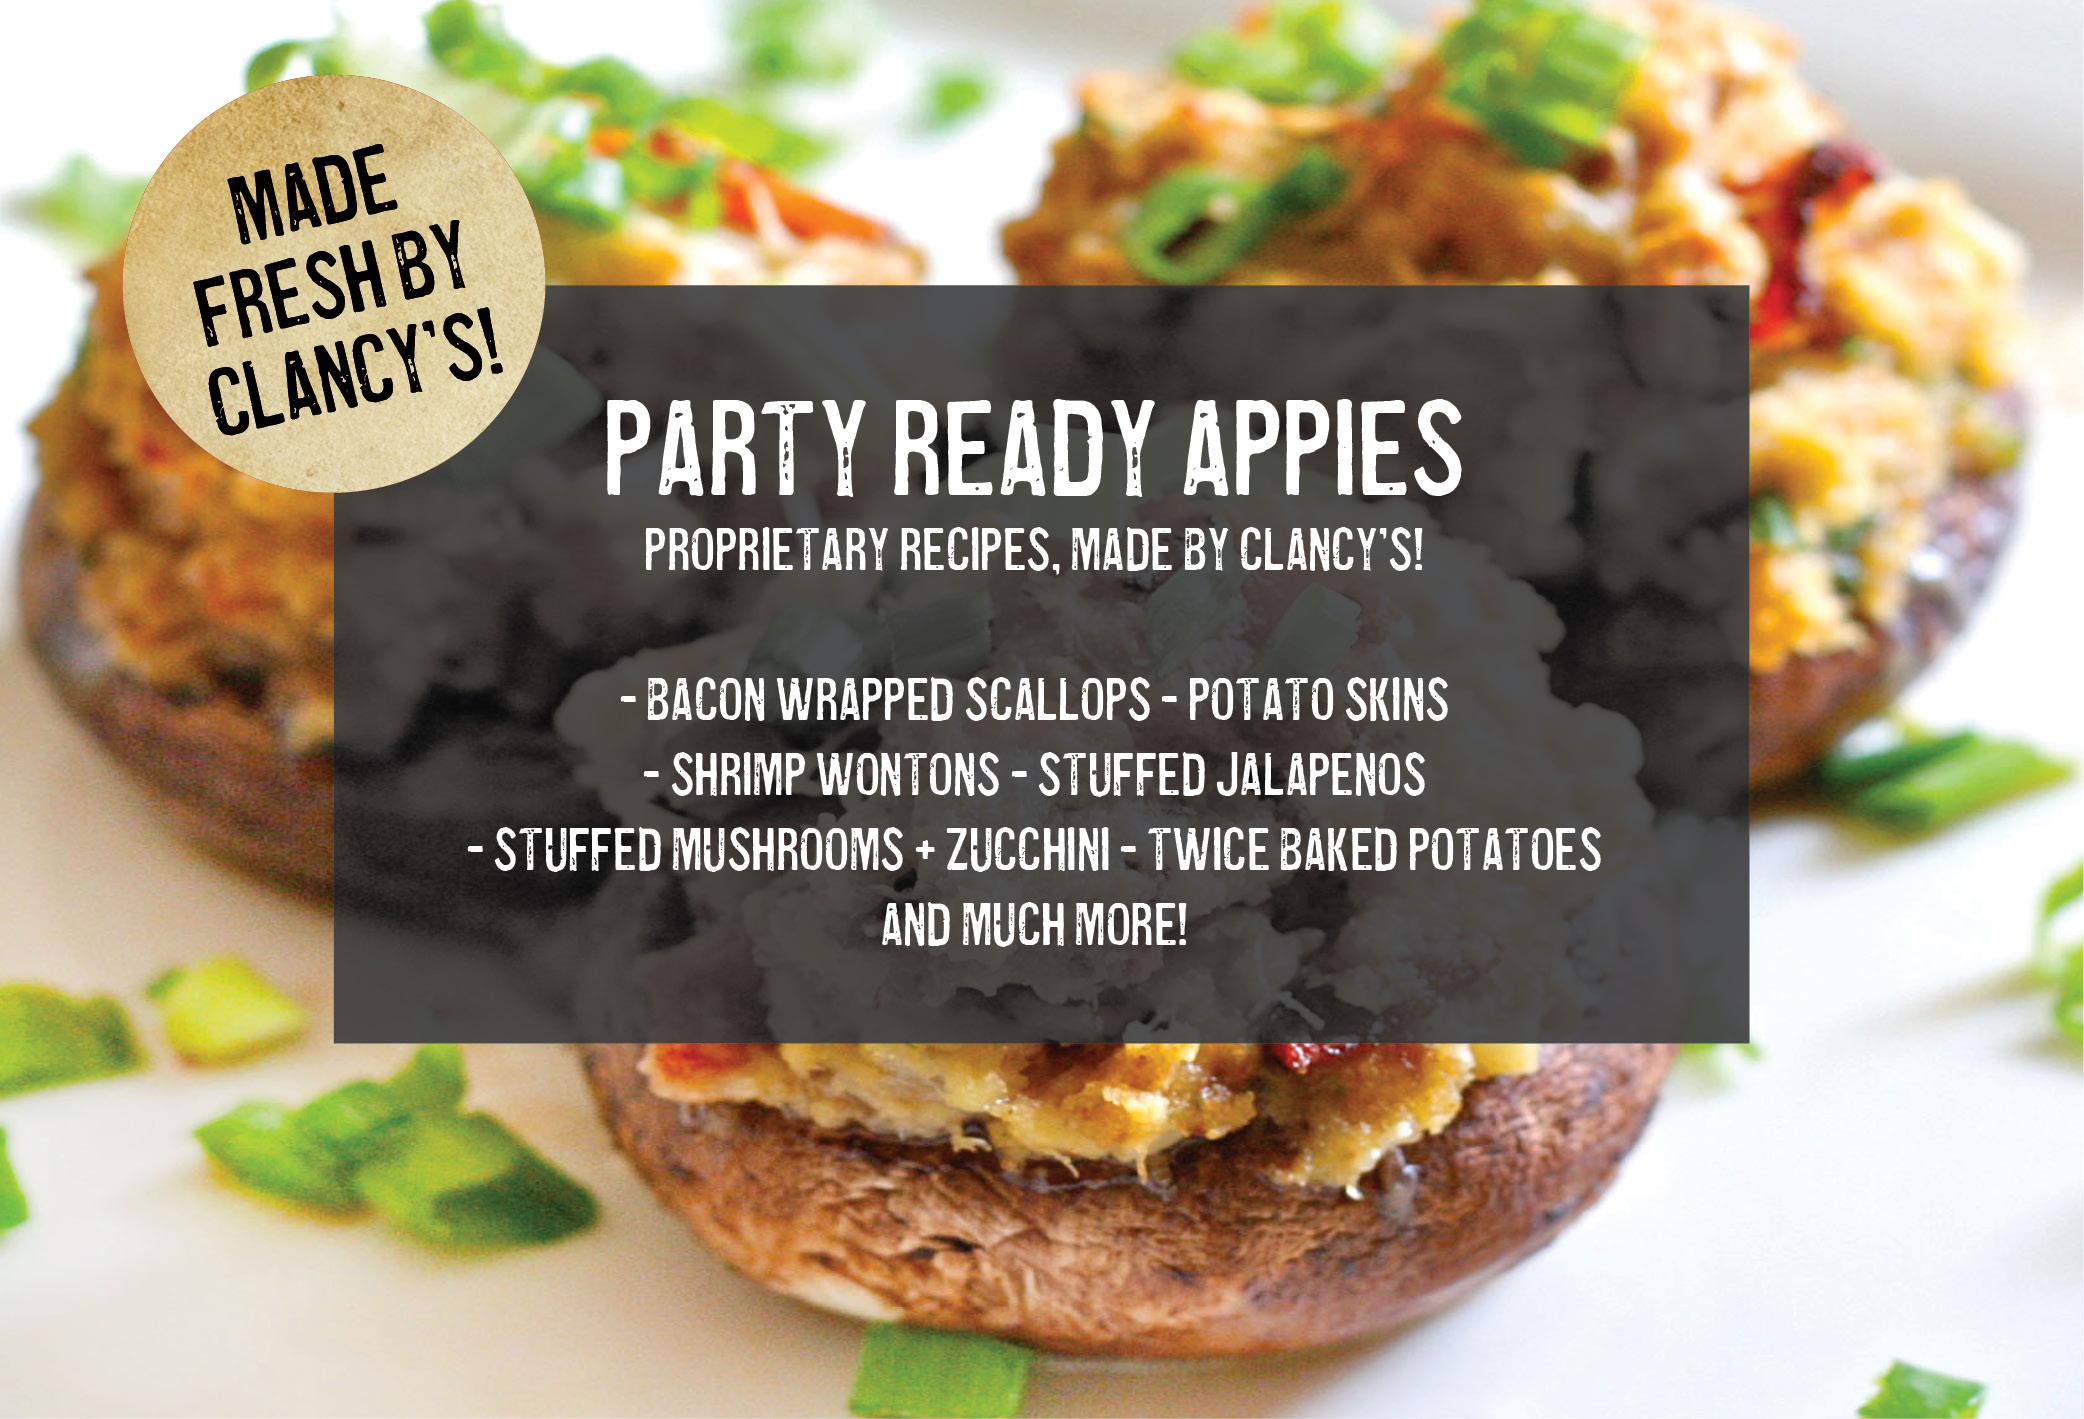 Party Ready Appies Products.jpg